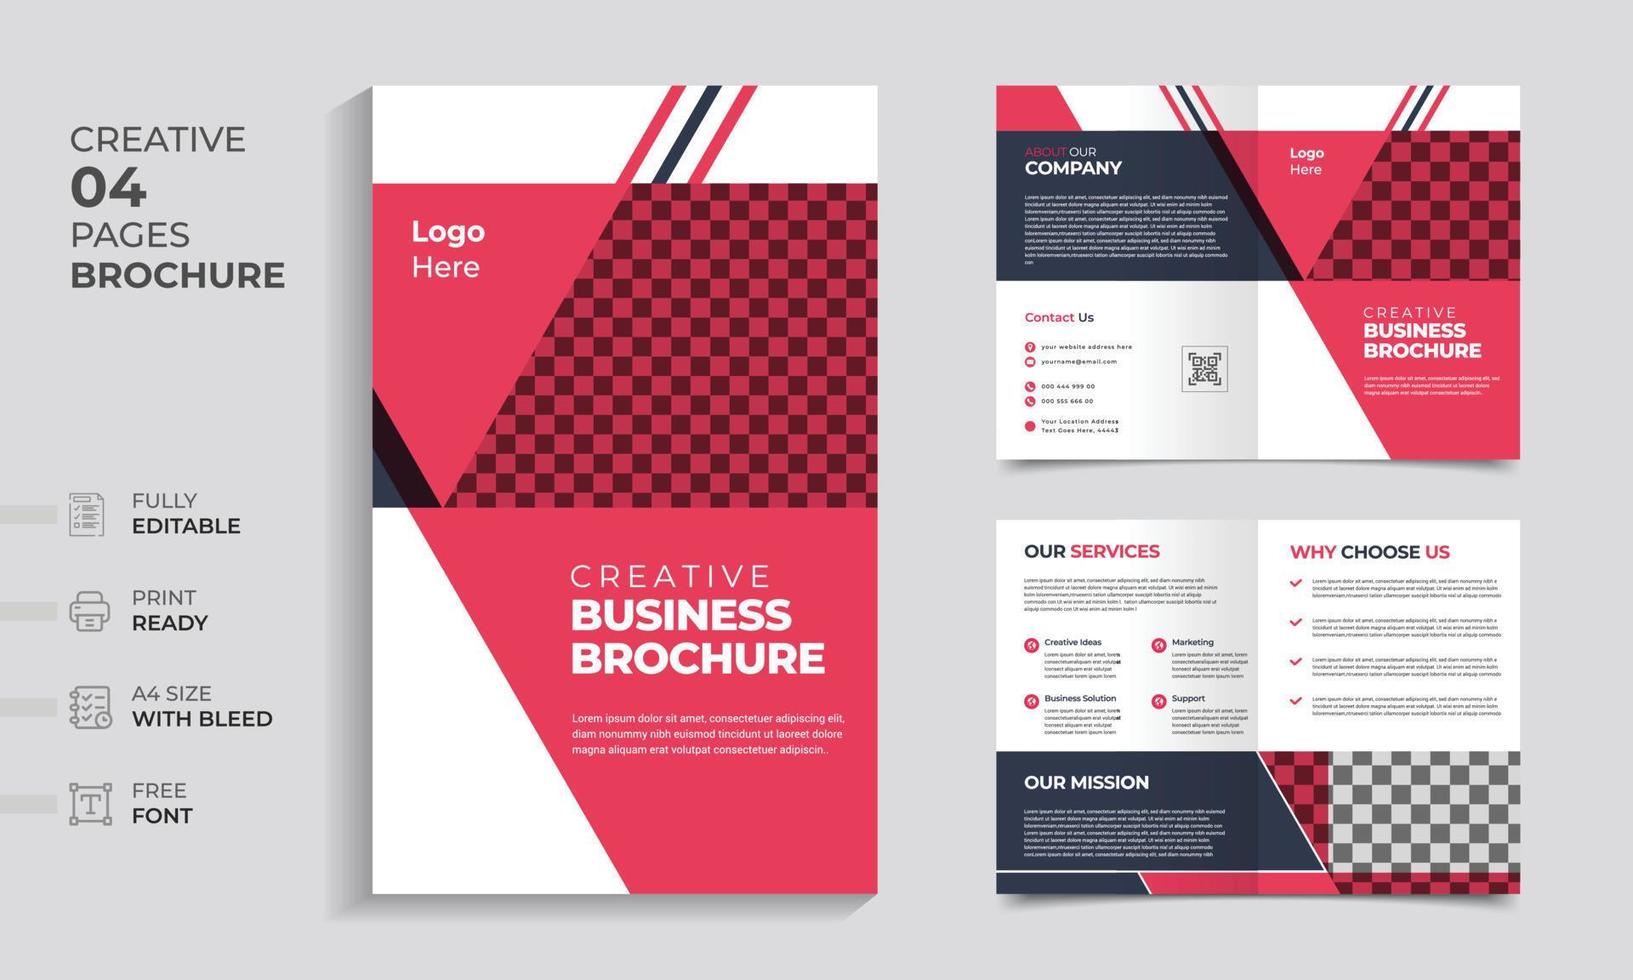 Minimal business brochure template layout design, creative business brochure, business profile brochure red color shape design, corporate company profile, annual report, editable business brochure. vector